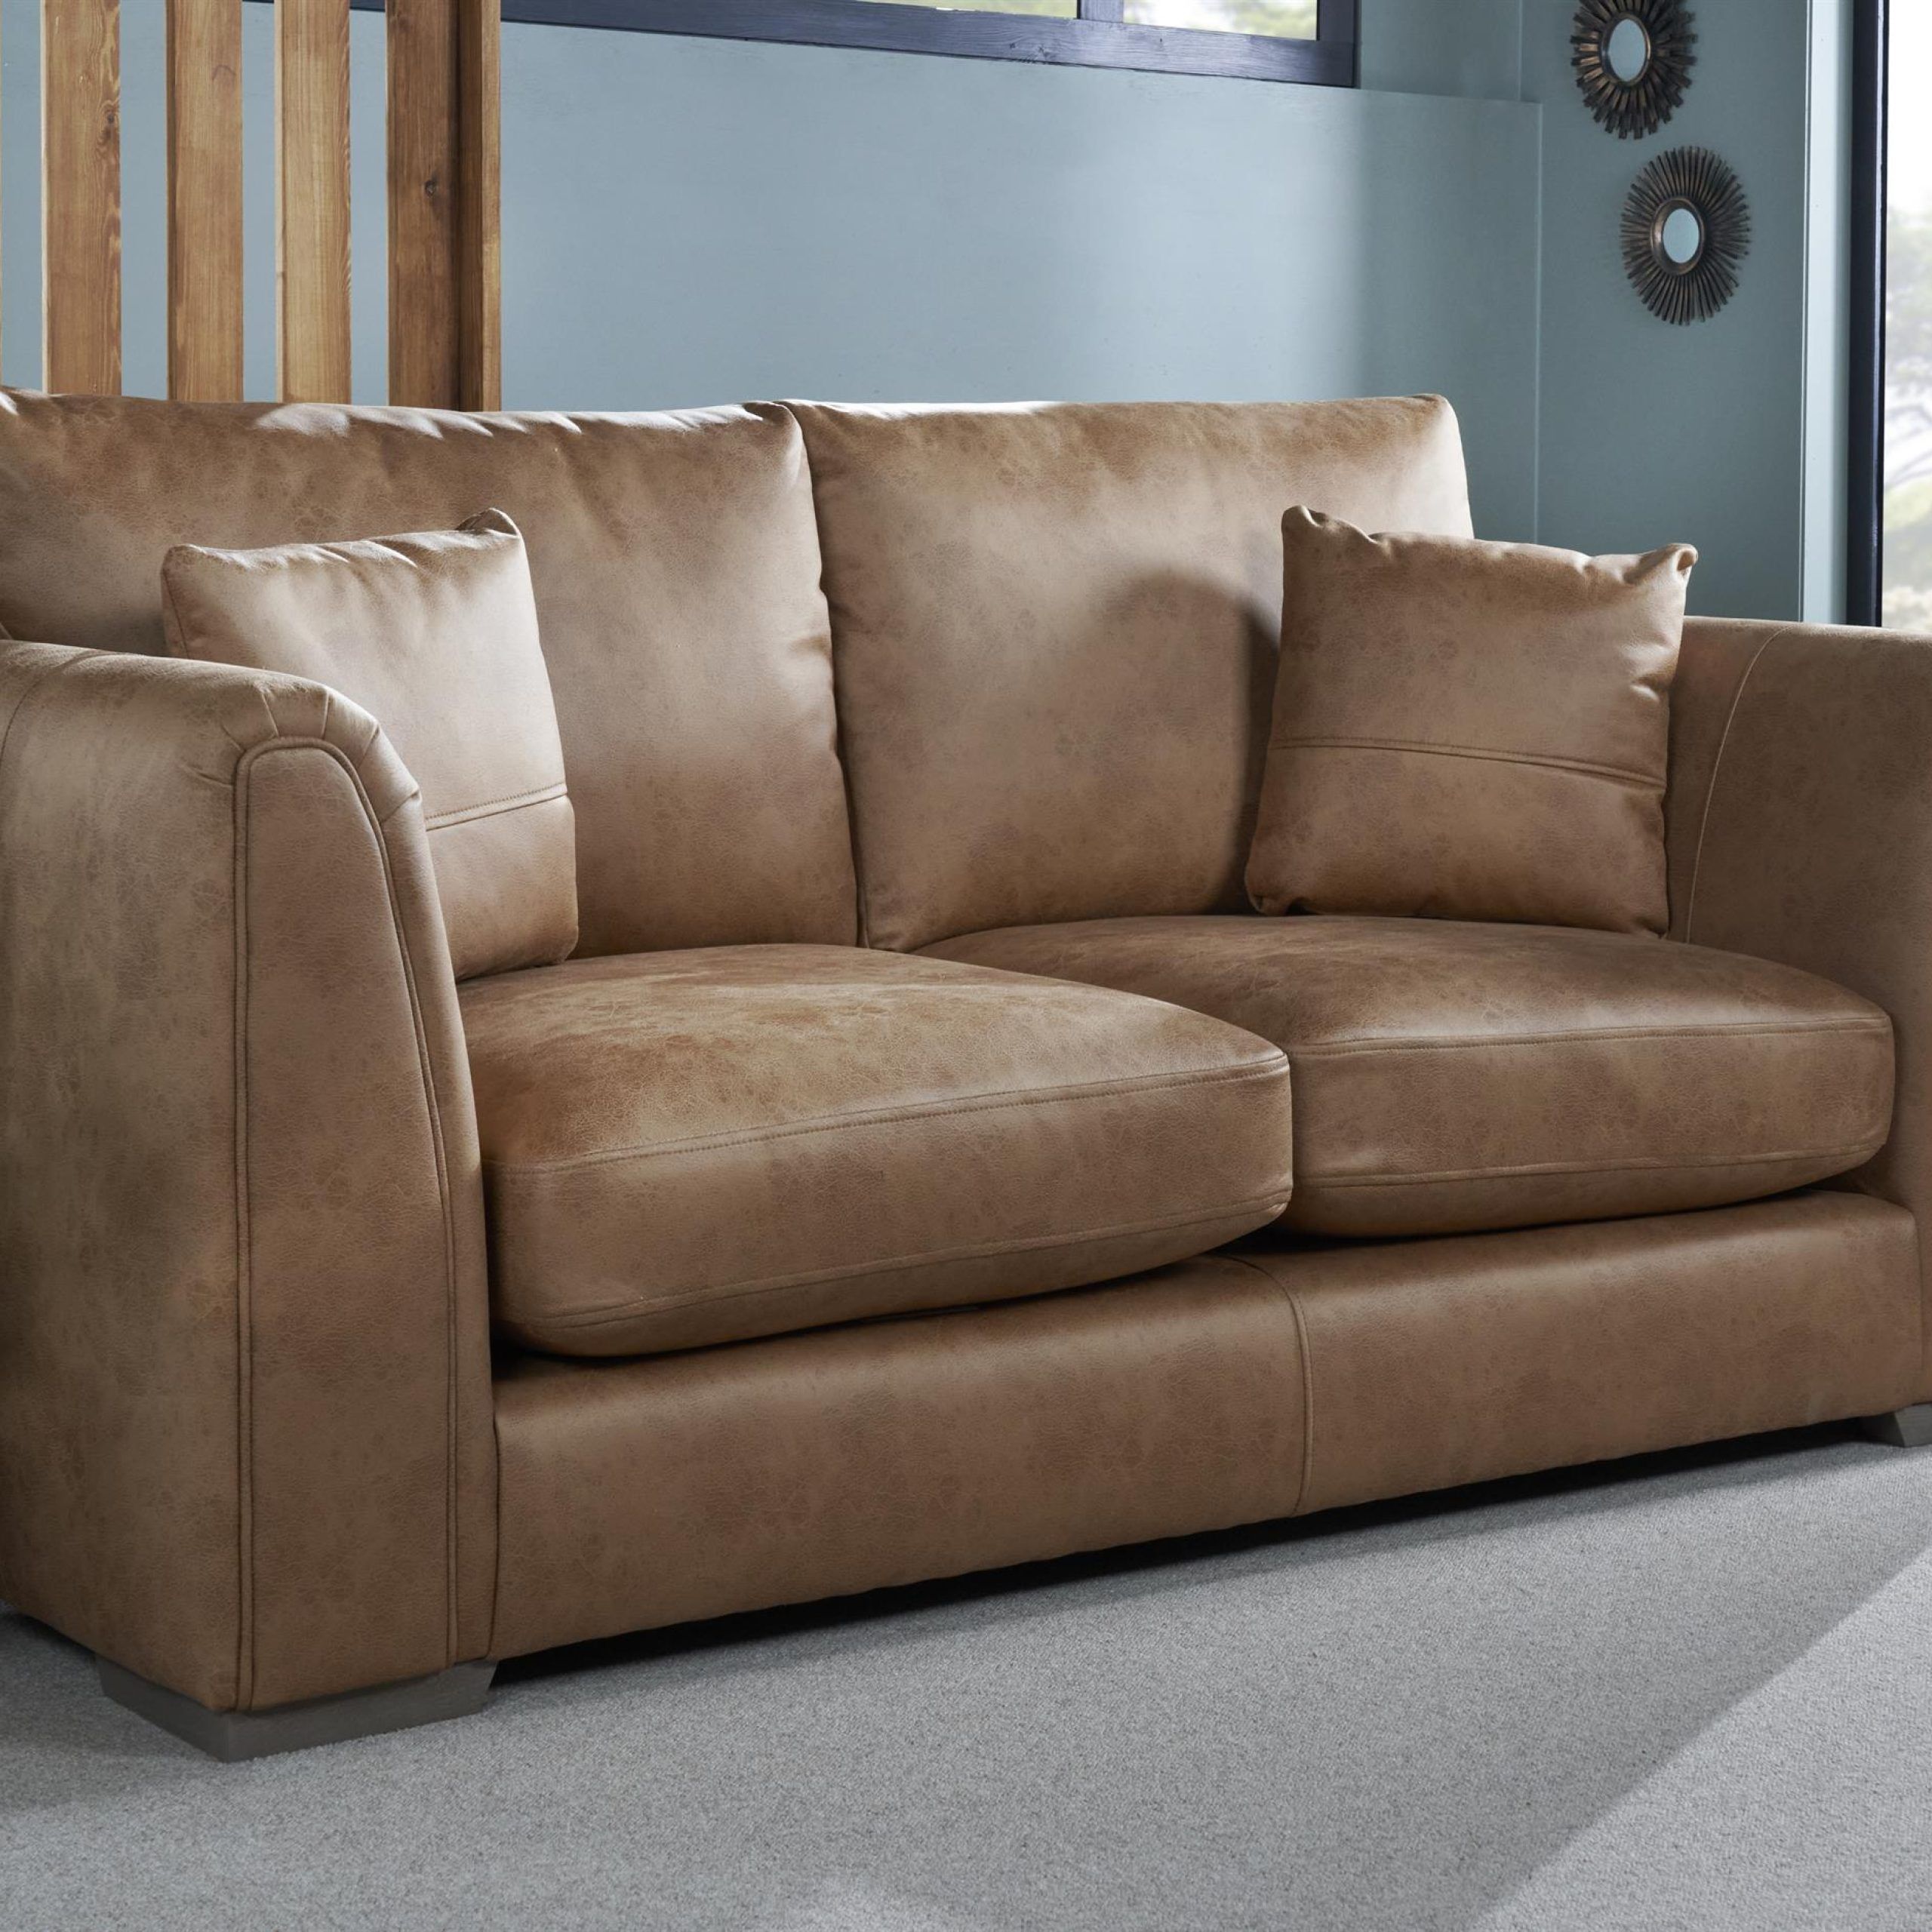 Endurance Xavier Faux Leather 2 Seater Sofa Throughout Faux Leather Sofas (View 3 of 15)